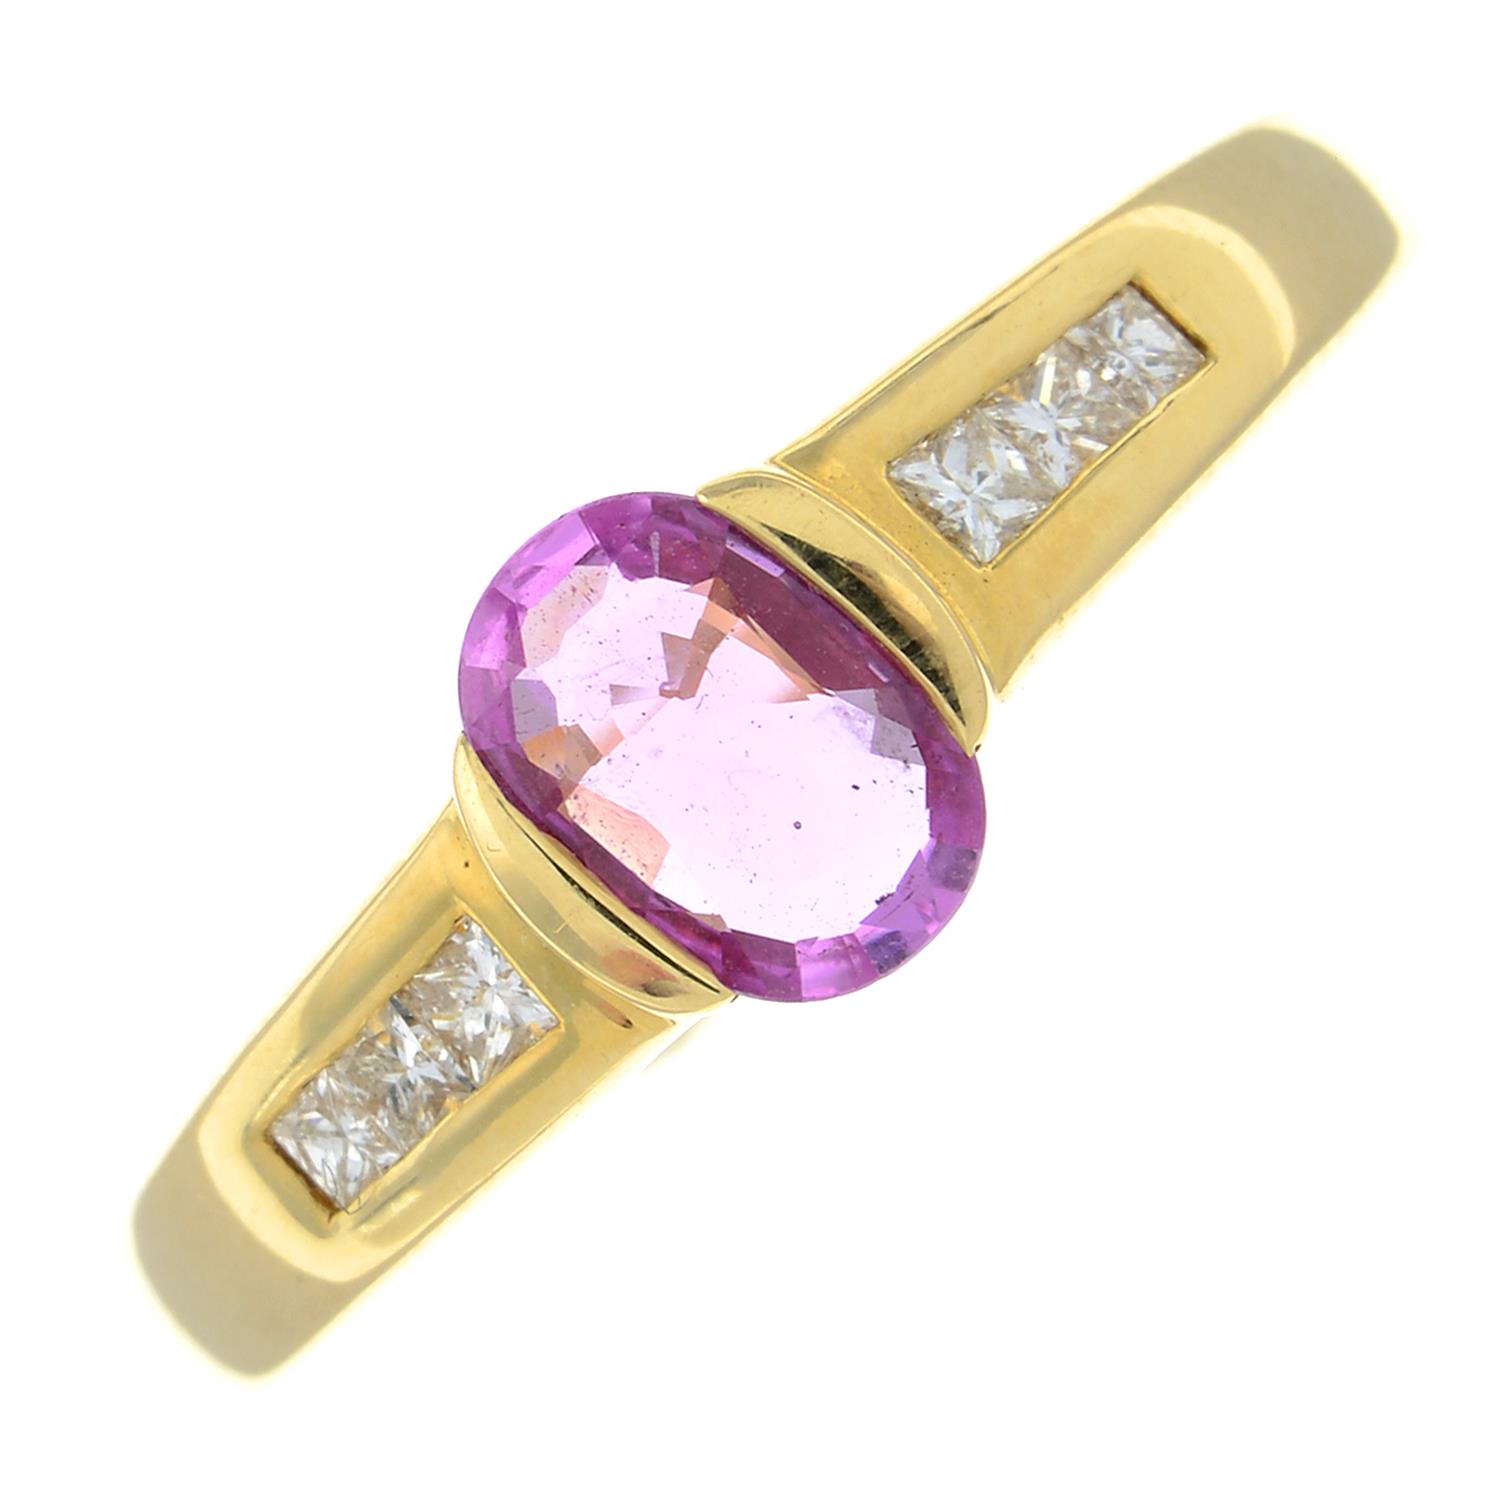 An 18ct gold pink sapphire and diamond dress ring.